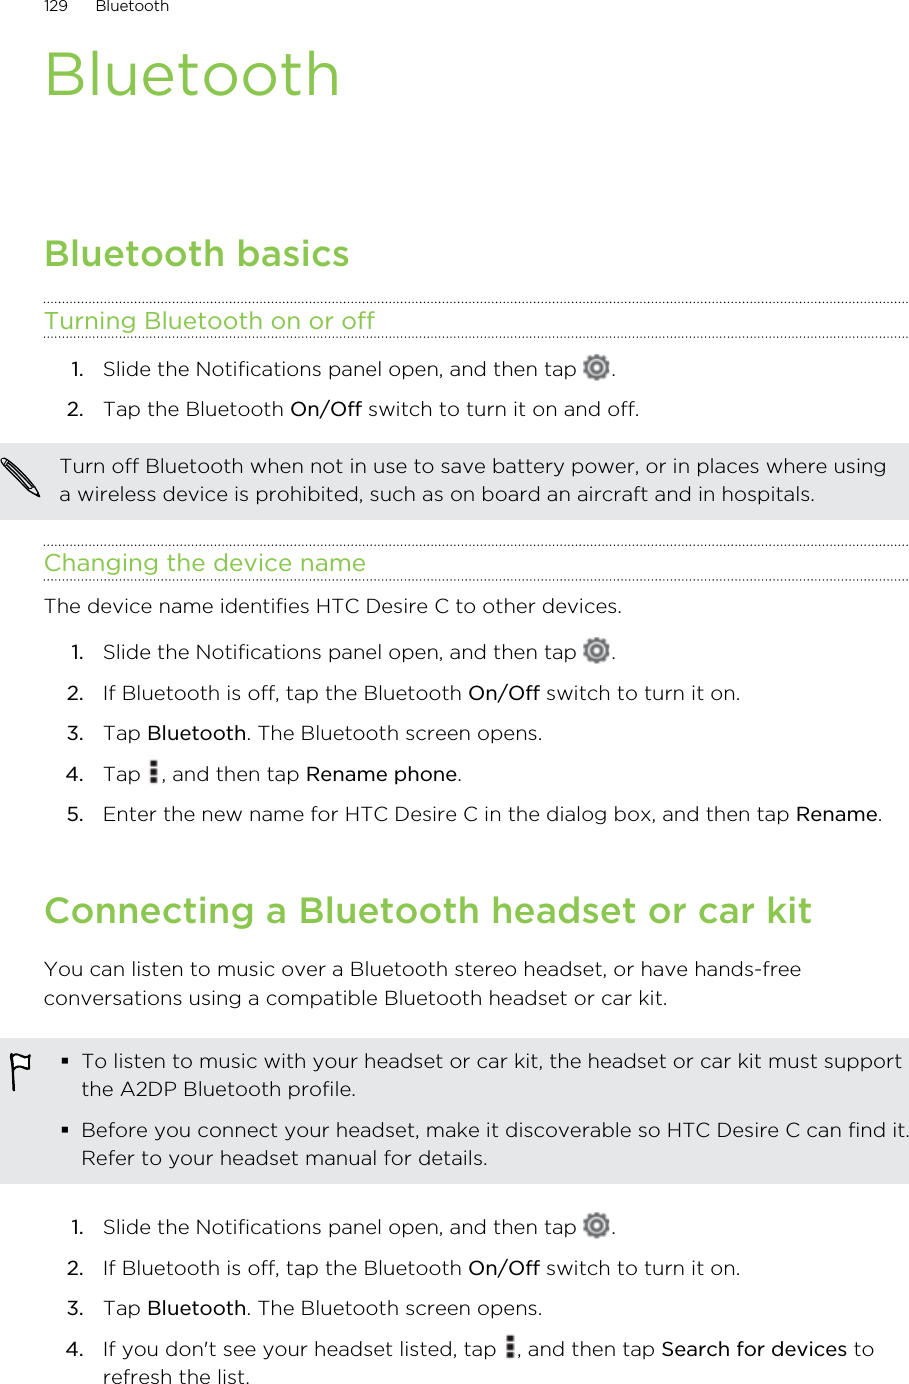 BluetoothBluetooth basicsTurning Bluetooth on or off1. Slide the Notifications panel open, and then tap  .2. Tap the Bluetooth On/Off switch to turn it on and off.Turn off Bluetooth when not in use to save battery power, or in places where usinga wireless device is prohibited, such as on board an aircraft and in hospitals.Changing the device nameThe device name identifies HTC Desire C to other devices.1. Slide the Notifications panel open, and then tap  .2. If Bluetooth is off, tap the Bluetooth On/Off switch to turn it on.3. Tap Bluetooth. The Bluetooth screen opens.4. Tap  , and then tap Rename phone.5. Enter the new name for HTC Desire C in the dialog box, and then tap Rename.Connecting a Bluetooth headset or car kitYou can listen to music over a Bluetooth stereo headset, or have hands-freeconversations using a compatible Bluetooth headset or car kit.To listen to music with your headset or car kit, the headset or car kit must supportthe A2DP Bluetooth profile.Before you connect your headset, make it discoverable so HTC Desire C can find it.Refer to your headset manual for details.1. Slide the Notifications panel open, and then tap  .2. If Bluetooth is off, tap the Bluetooth On/Off switch to turn it on.3. Tap Bluetooth. The Bluetooth screen opens.4. If you don&apos;t see your headset listed, tap  , and then tap Search for devices torefresh the list.129 Bluetooth